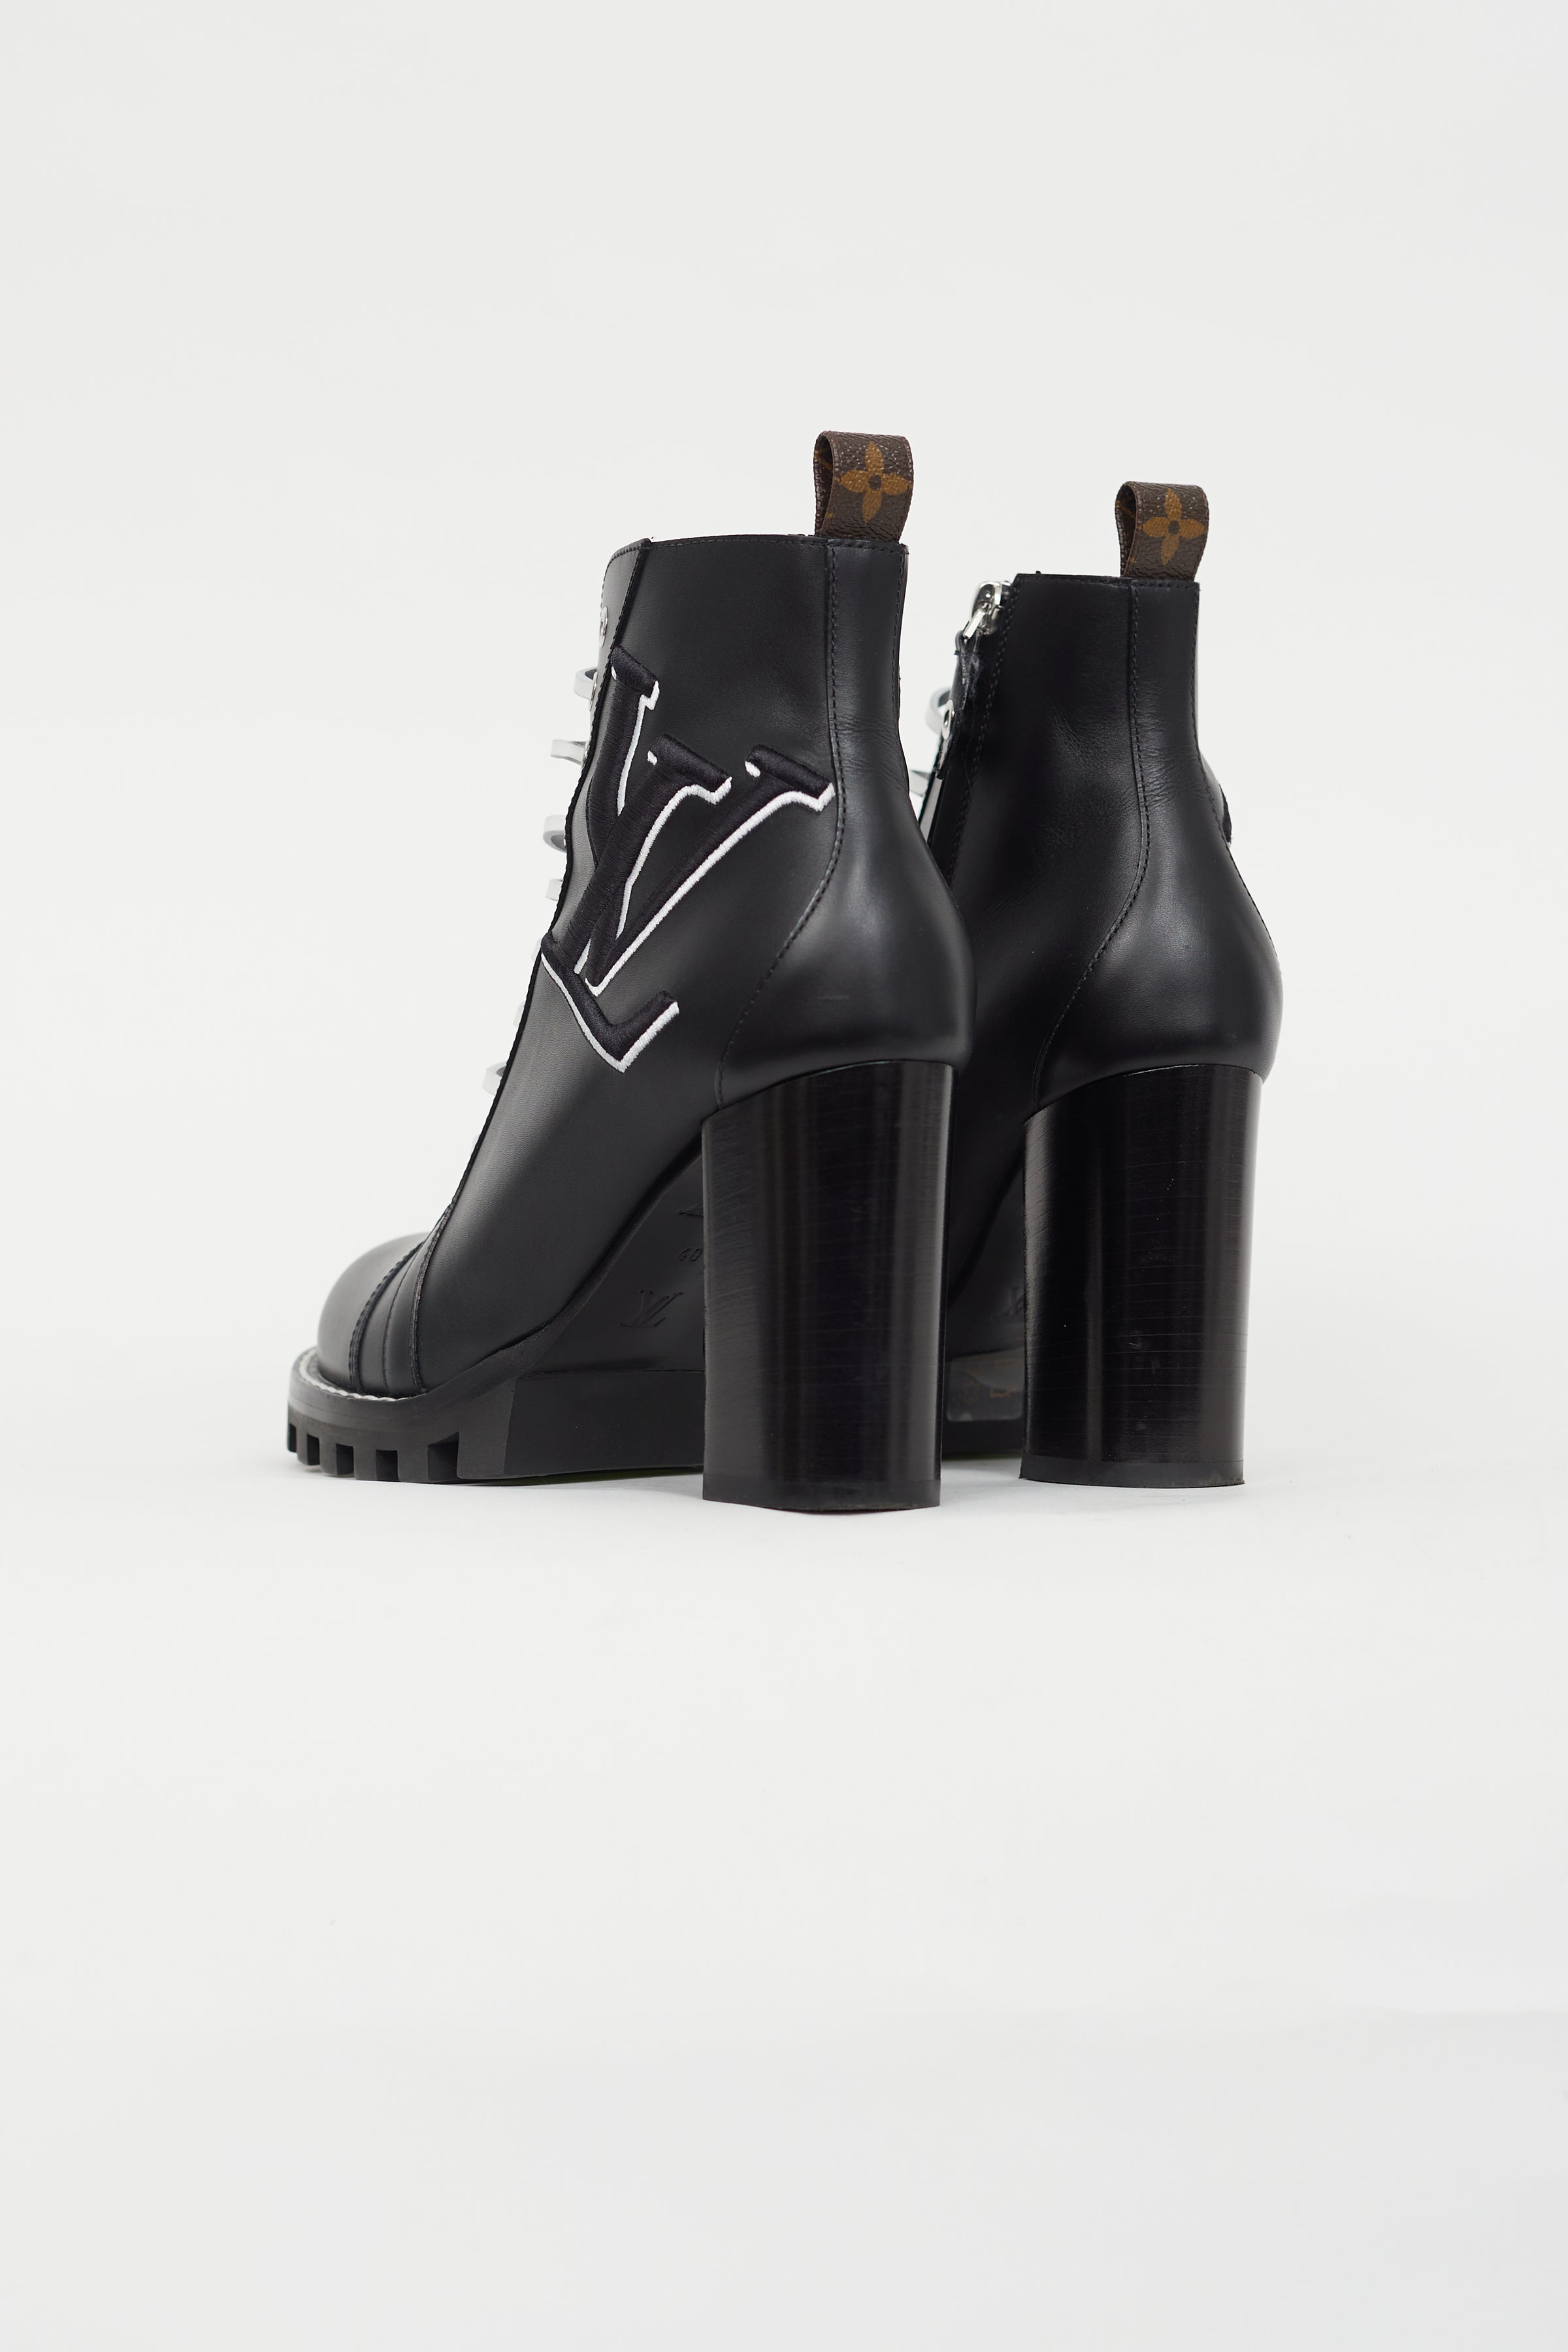 Louis Vuitton - Authenticated Ankle Boots - Leather Black for Women, Very Good Condition